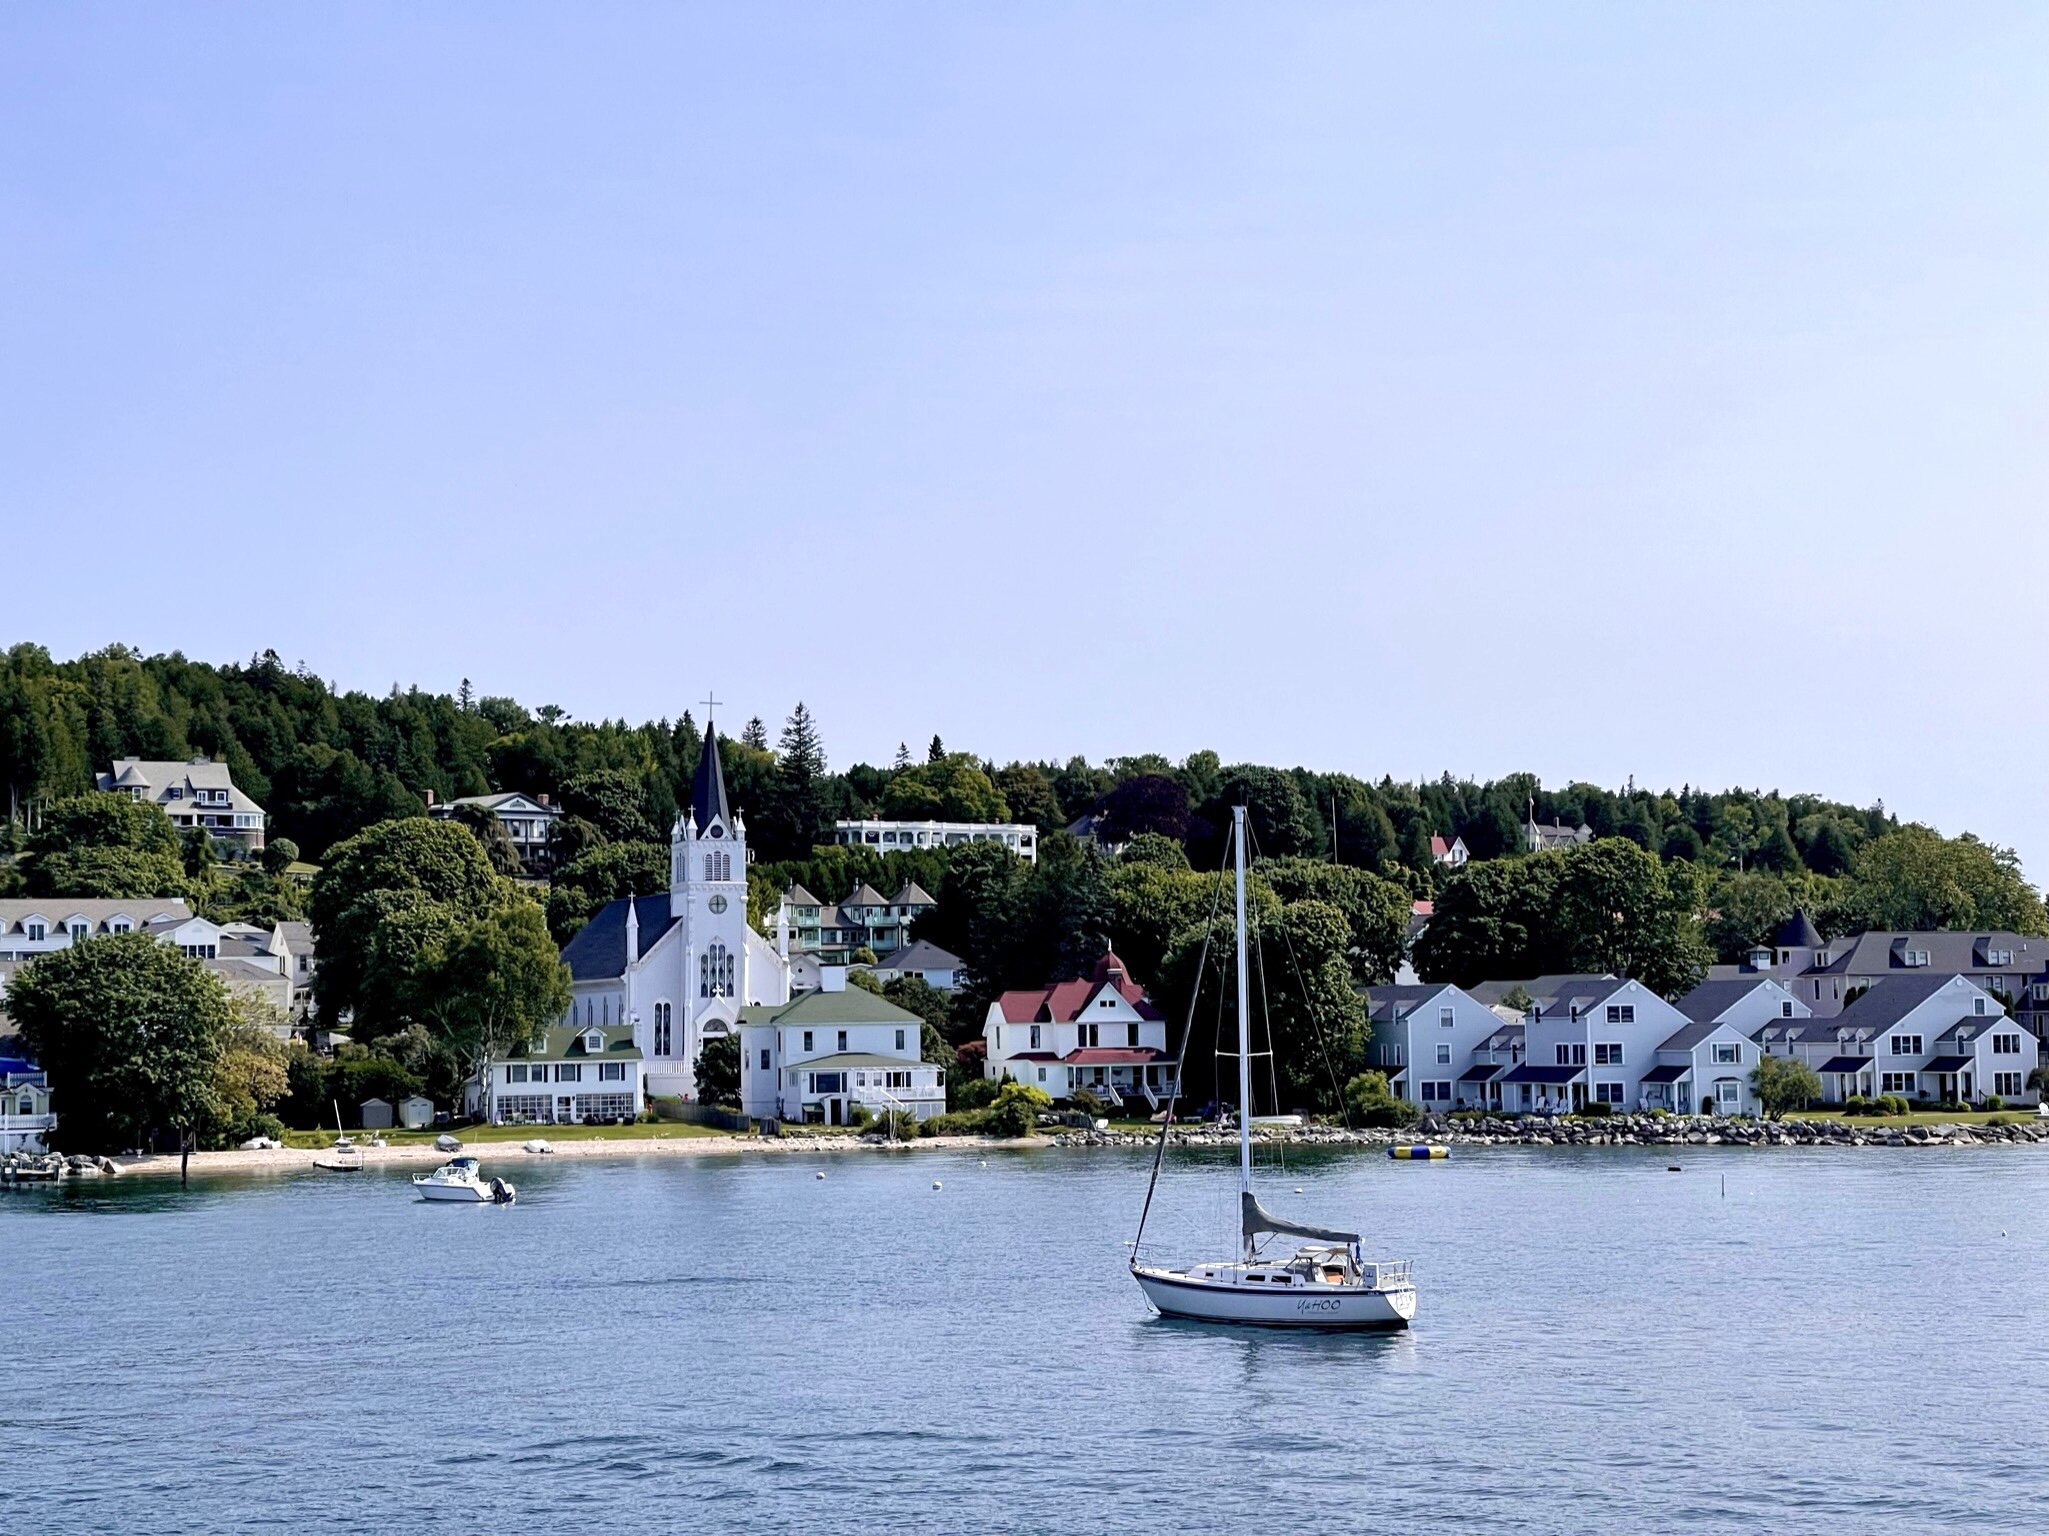  We crossed the Mackinac Bridge into the upper peninsula, and caught a ferry onto  Mackinac Island . In the late 19th century, Mackinac Island became a popular tourist attraction and summer colony. Because of its historic significance, the entire isl